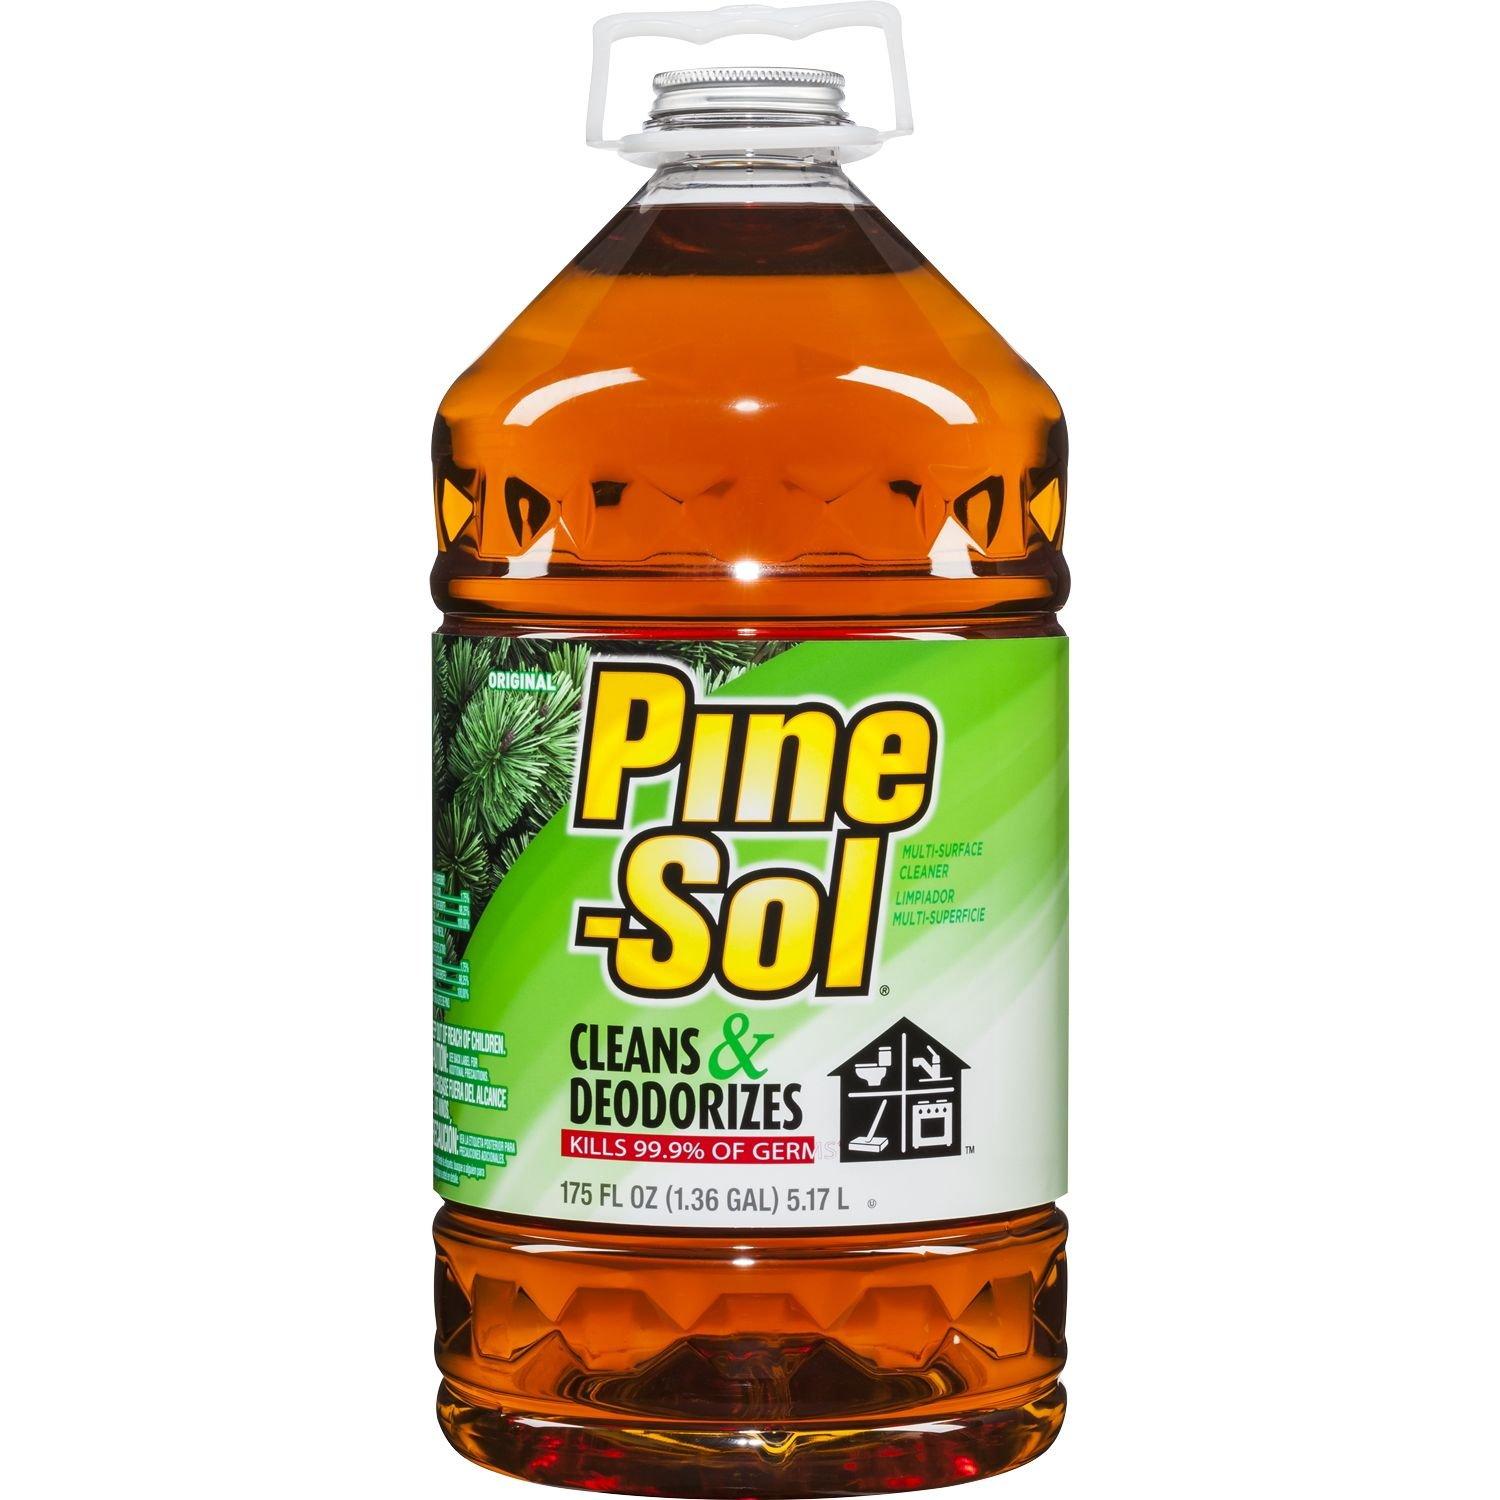 Can You Use Pine Sol To Wash Clothes